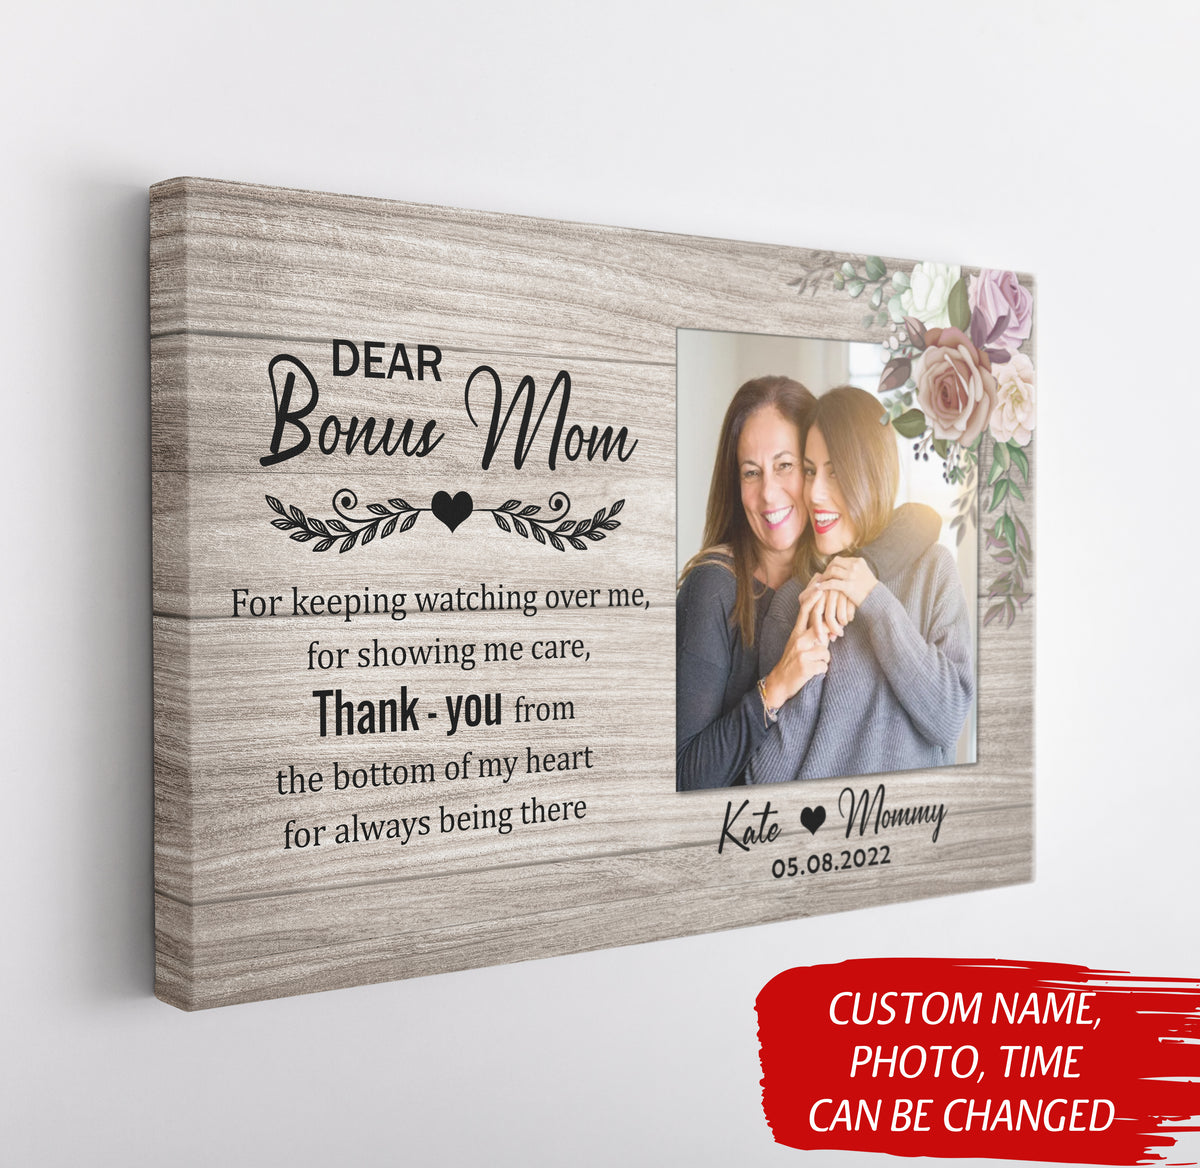 Personalized Gift For Bonus Mom With Meaningful Quotes - Giftforsoul